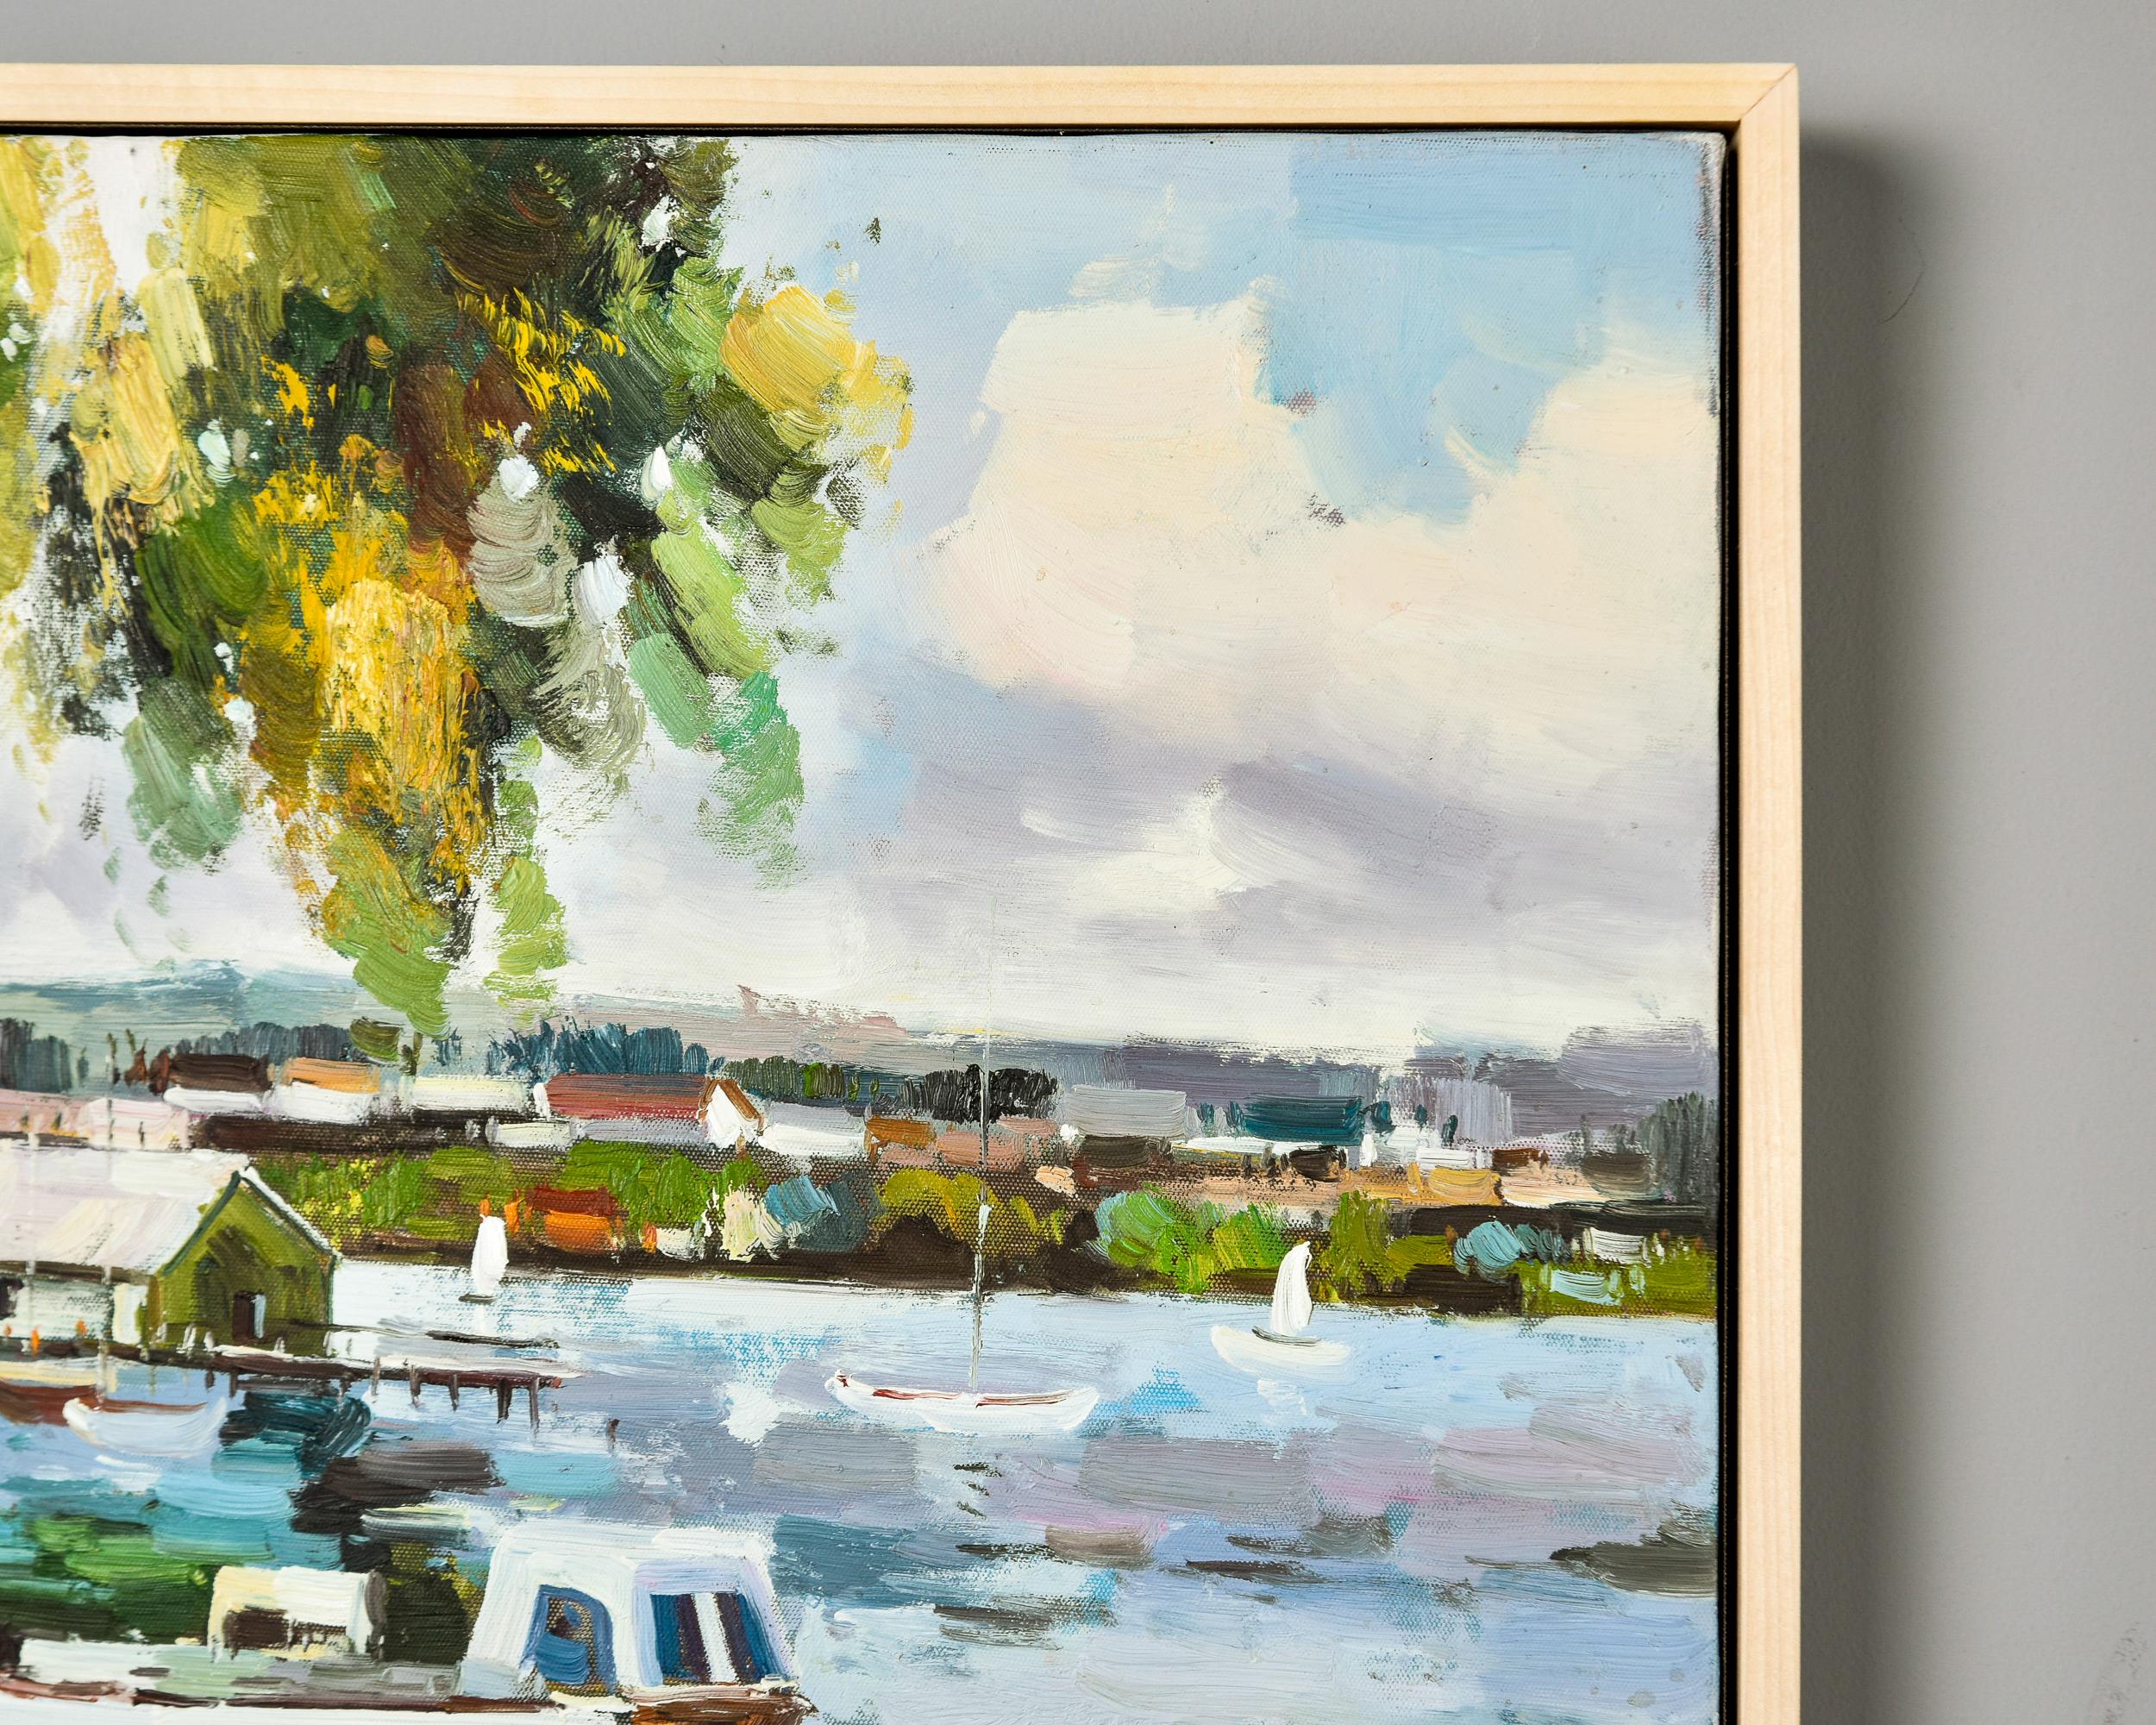 Vintage Framed Large Oil Painting on Canvas Depicting Boats in Harbor In Good Condition For Sale In Troy, MI